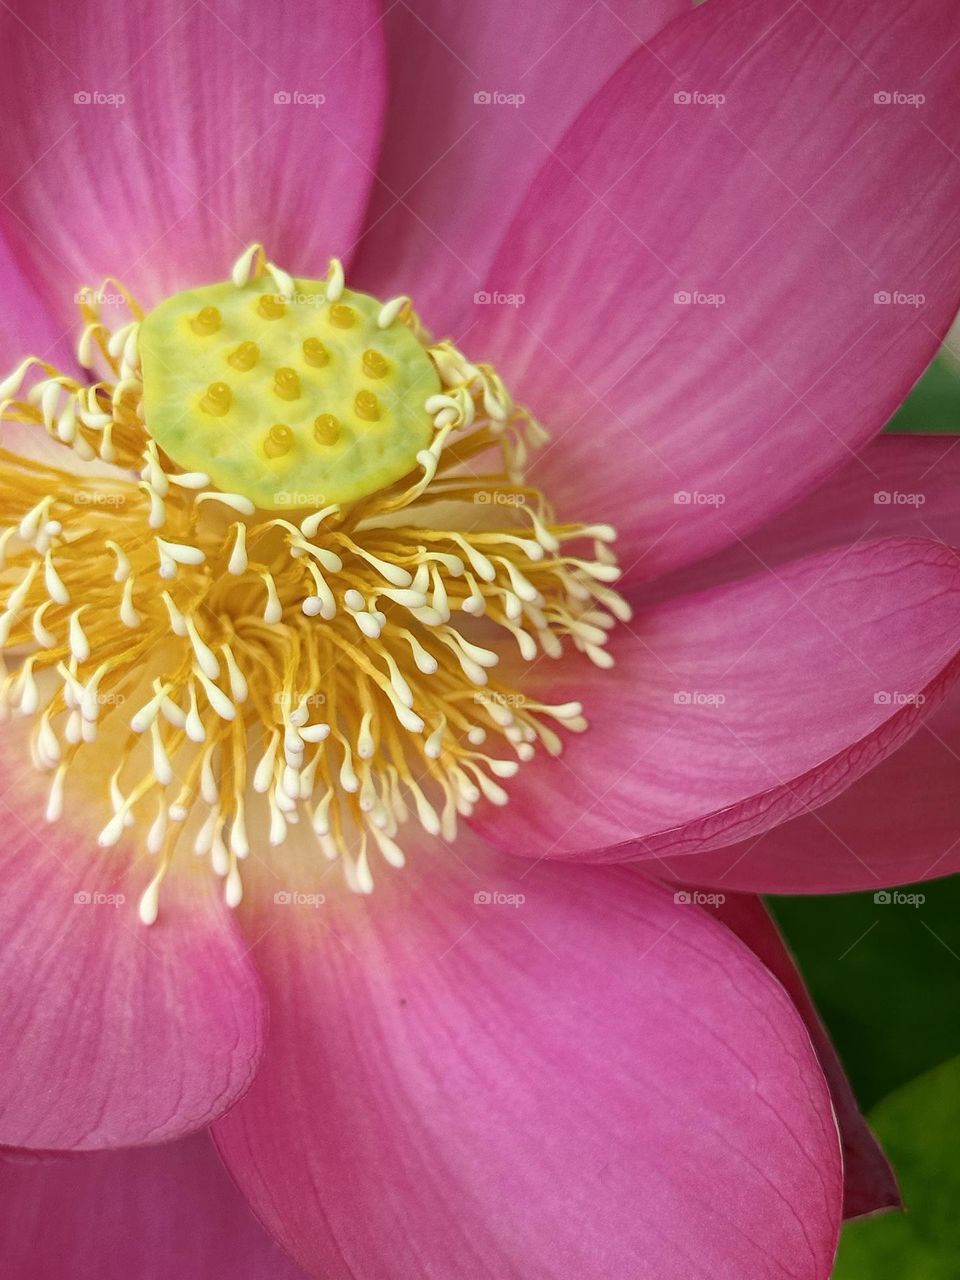 This is a close-up of a pink lotus flower with a green seed pod center surrounded by creamy stamens, set against a softly blurred background.